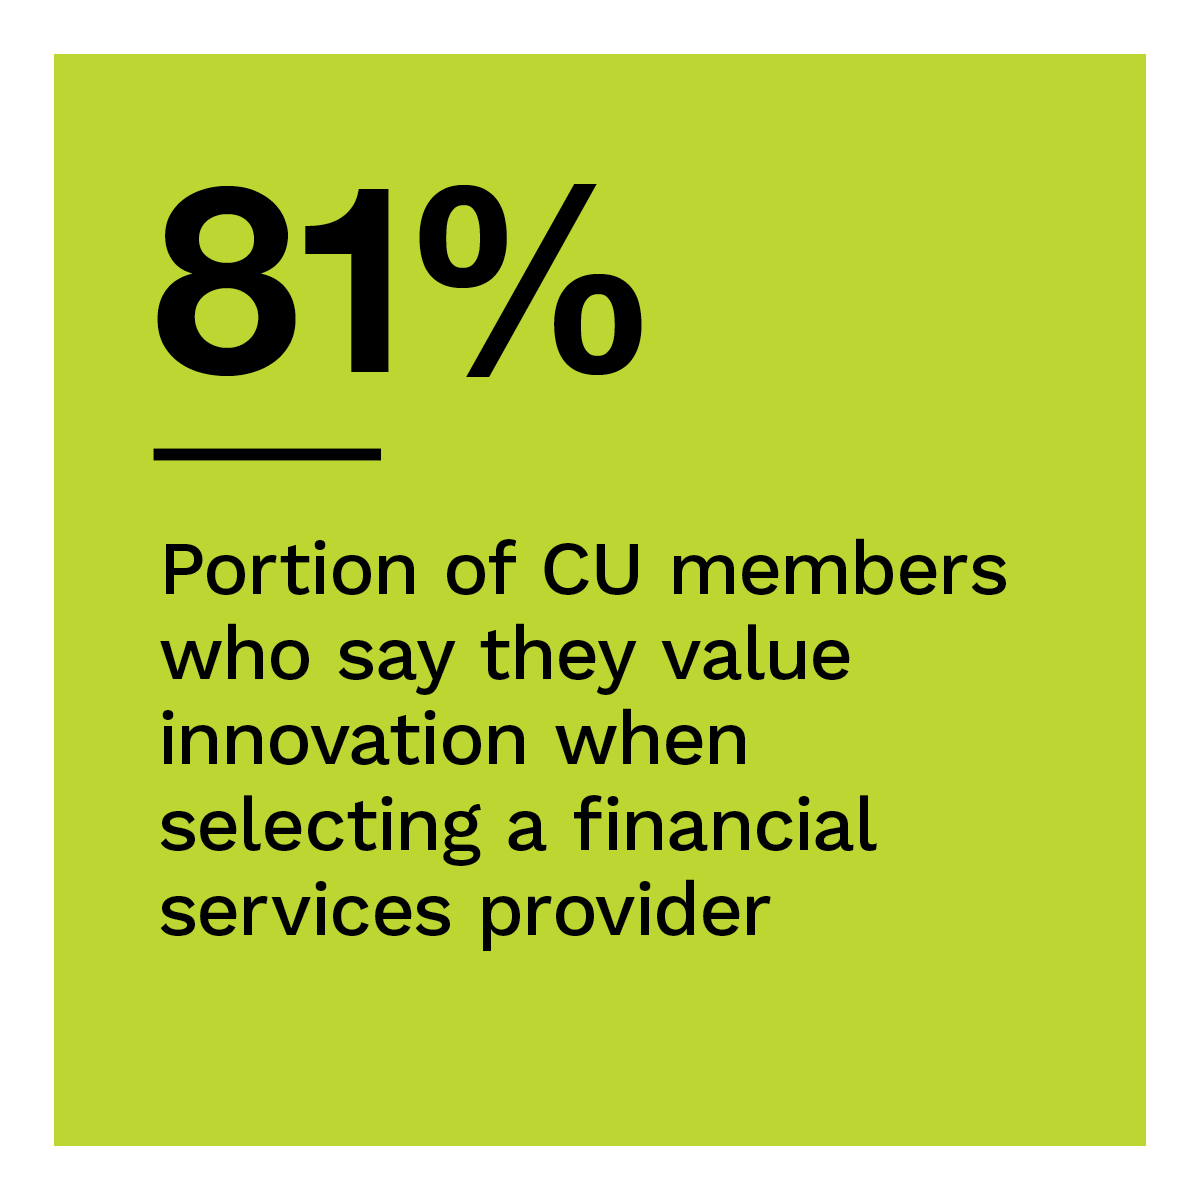 81%: Portion of CU members who say they value innovation when selecting a financial services provider